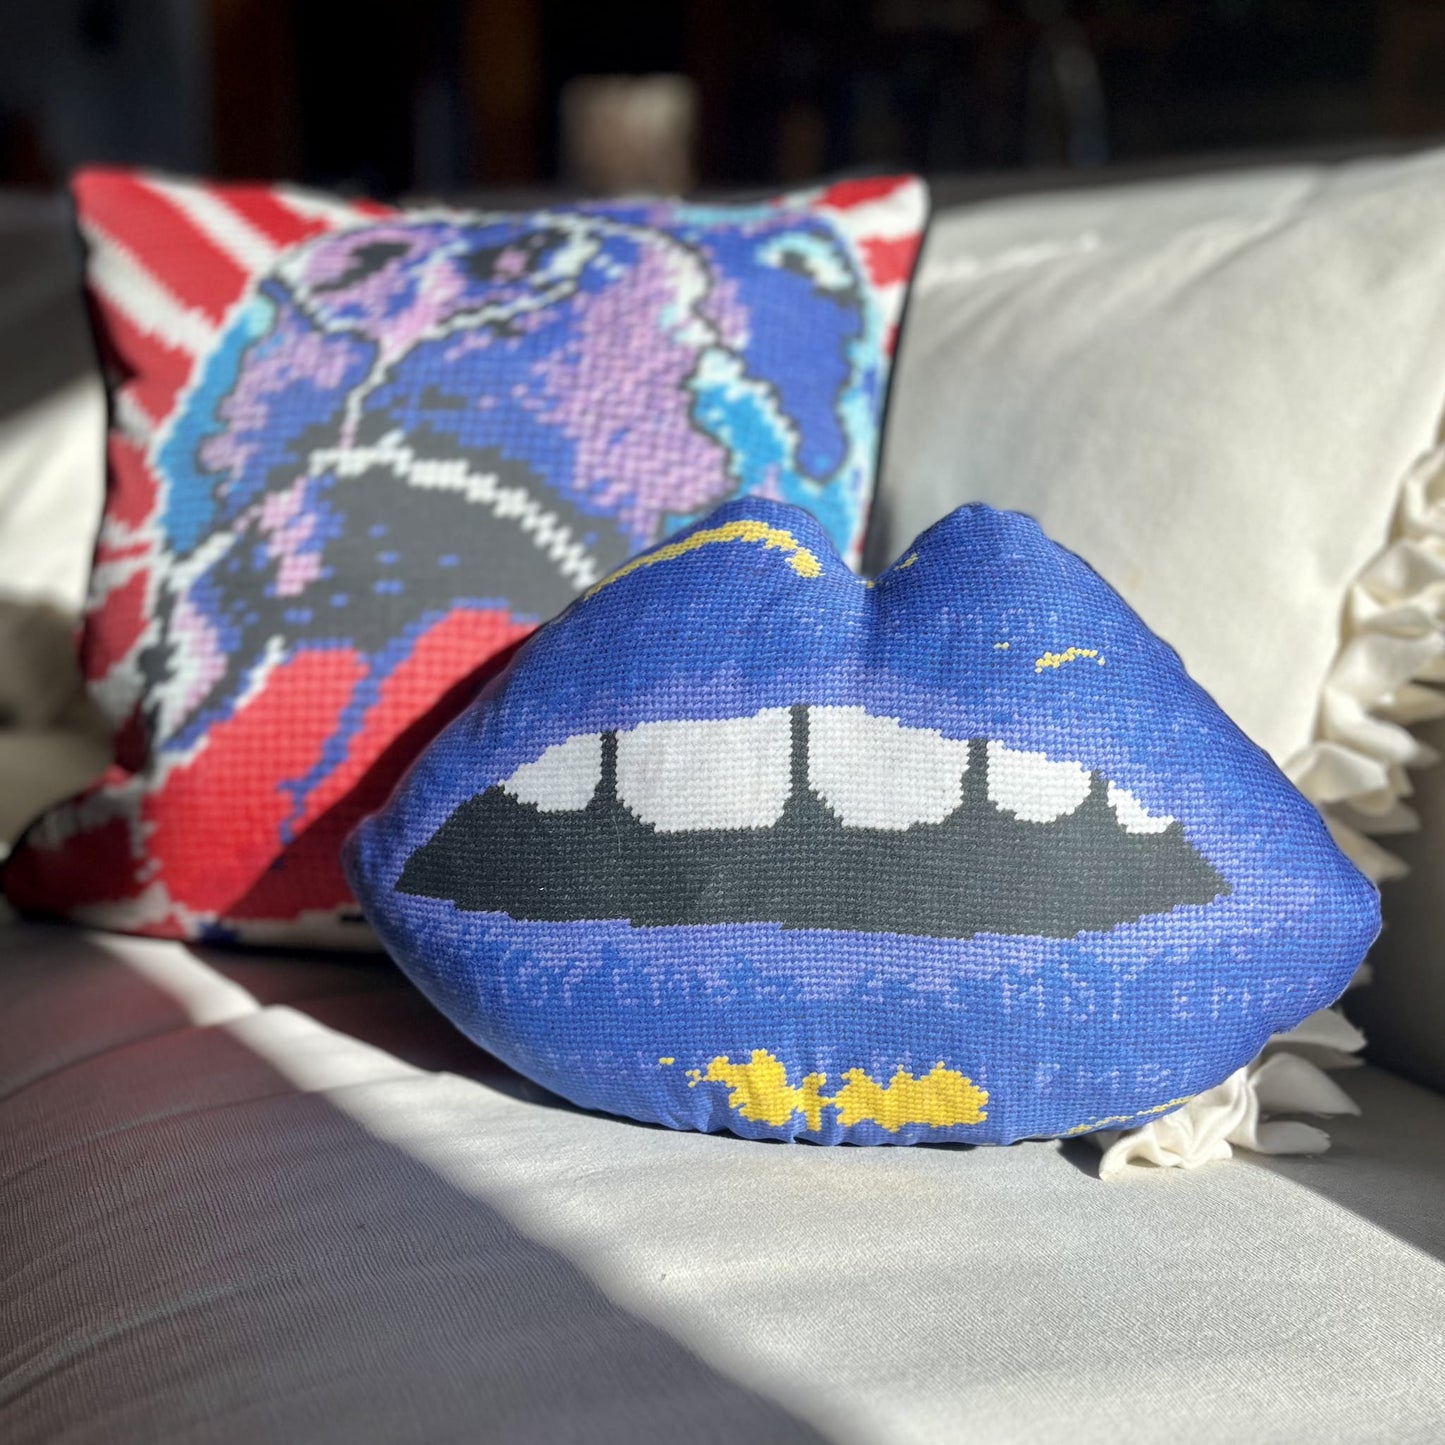 Sculpted blue lips pillow features blue lips with open mouth & gapped teeth